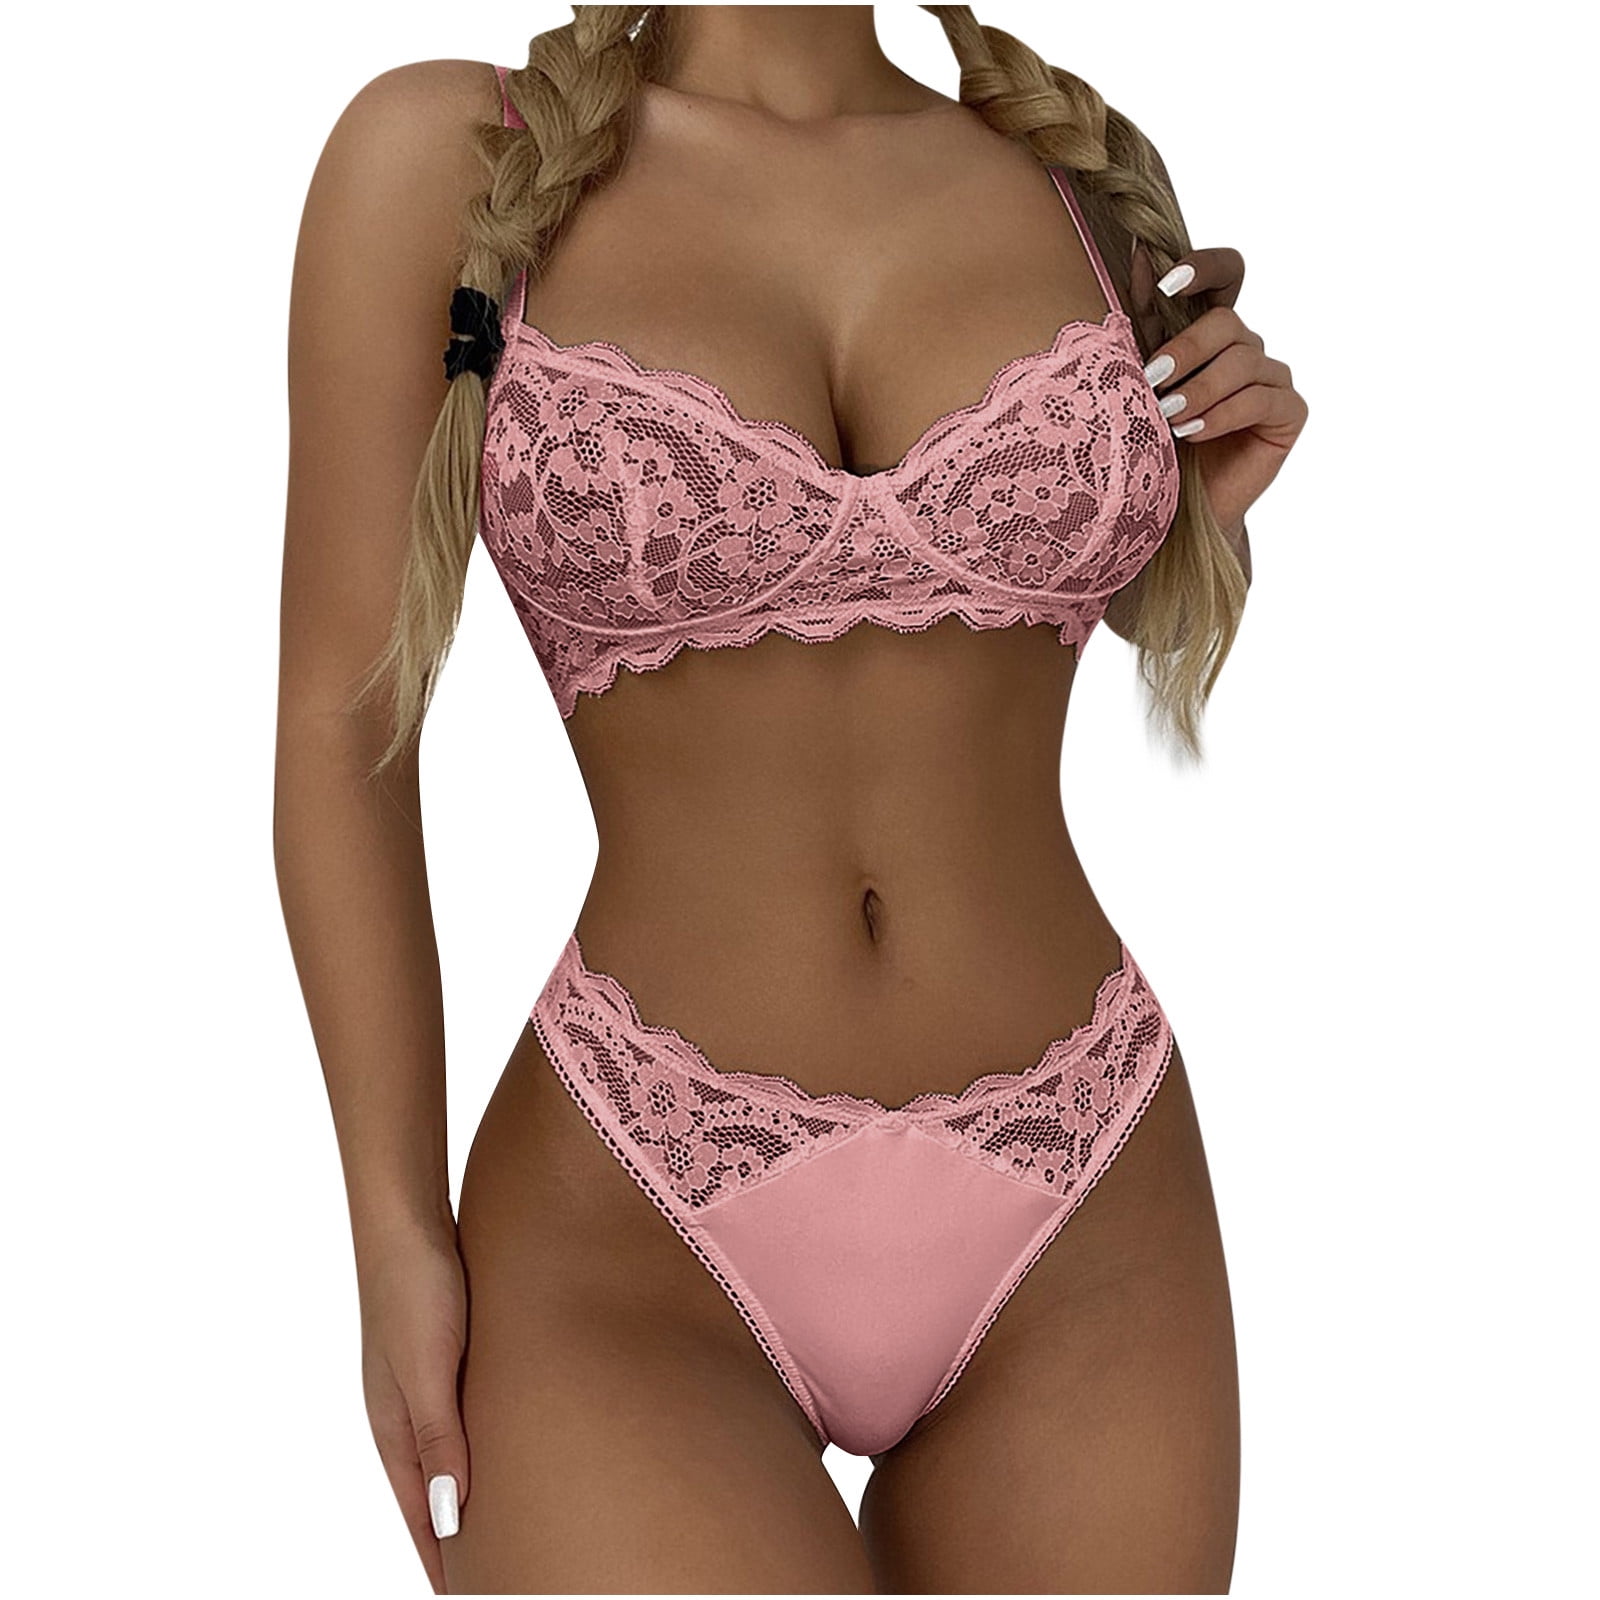 Girls Bra Women Sexy lingerie Set Women Sexy Lace lingerie Set Strappy Bra And Panty Set Two Piece Babydoll Crotchless lingerie Sexy Plus Size lingerie High Impact Sports pic